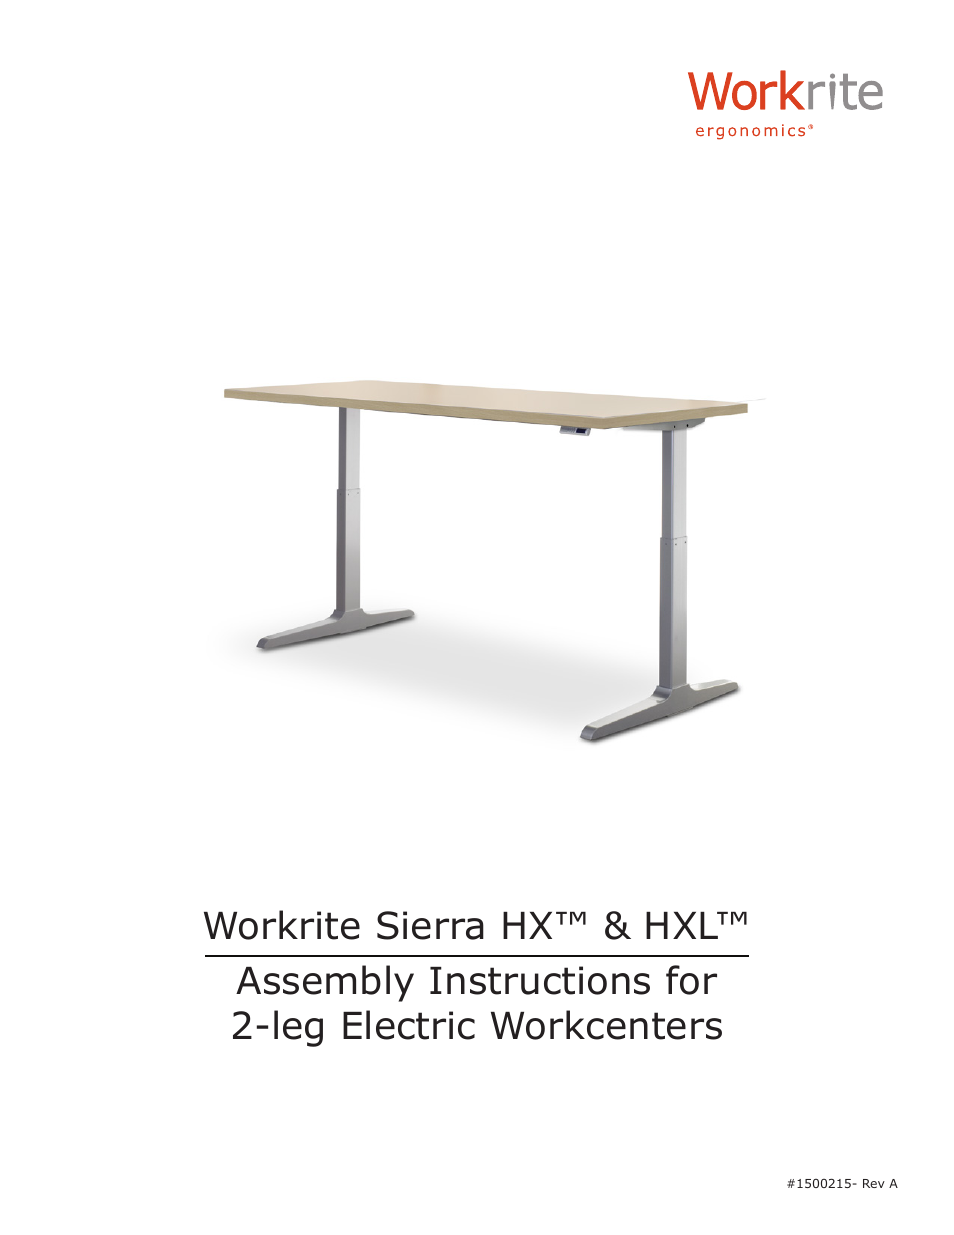 Sierra HXL Electric Assembly Instructions for 2-leg Electric Workcenters